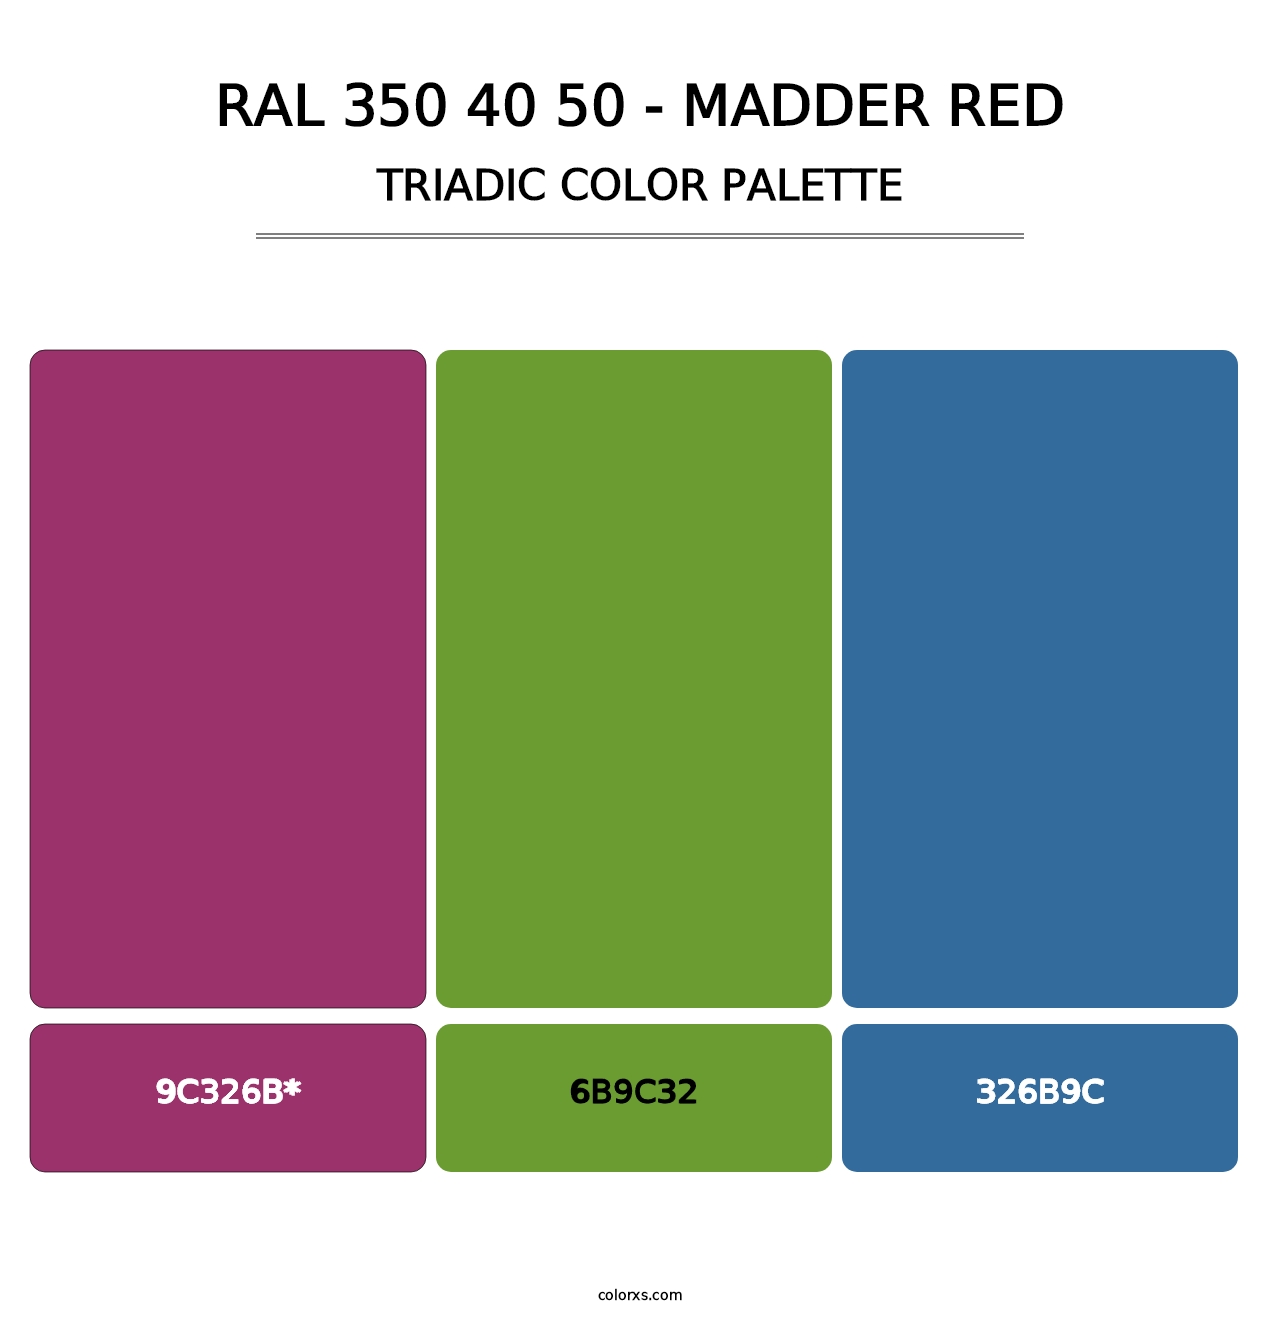 RAL 350 40 50 - Madder Red - Triadic Color Palette